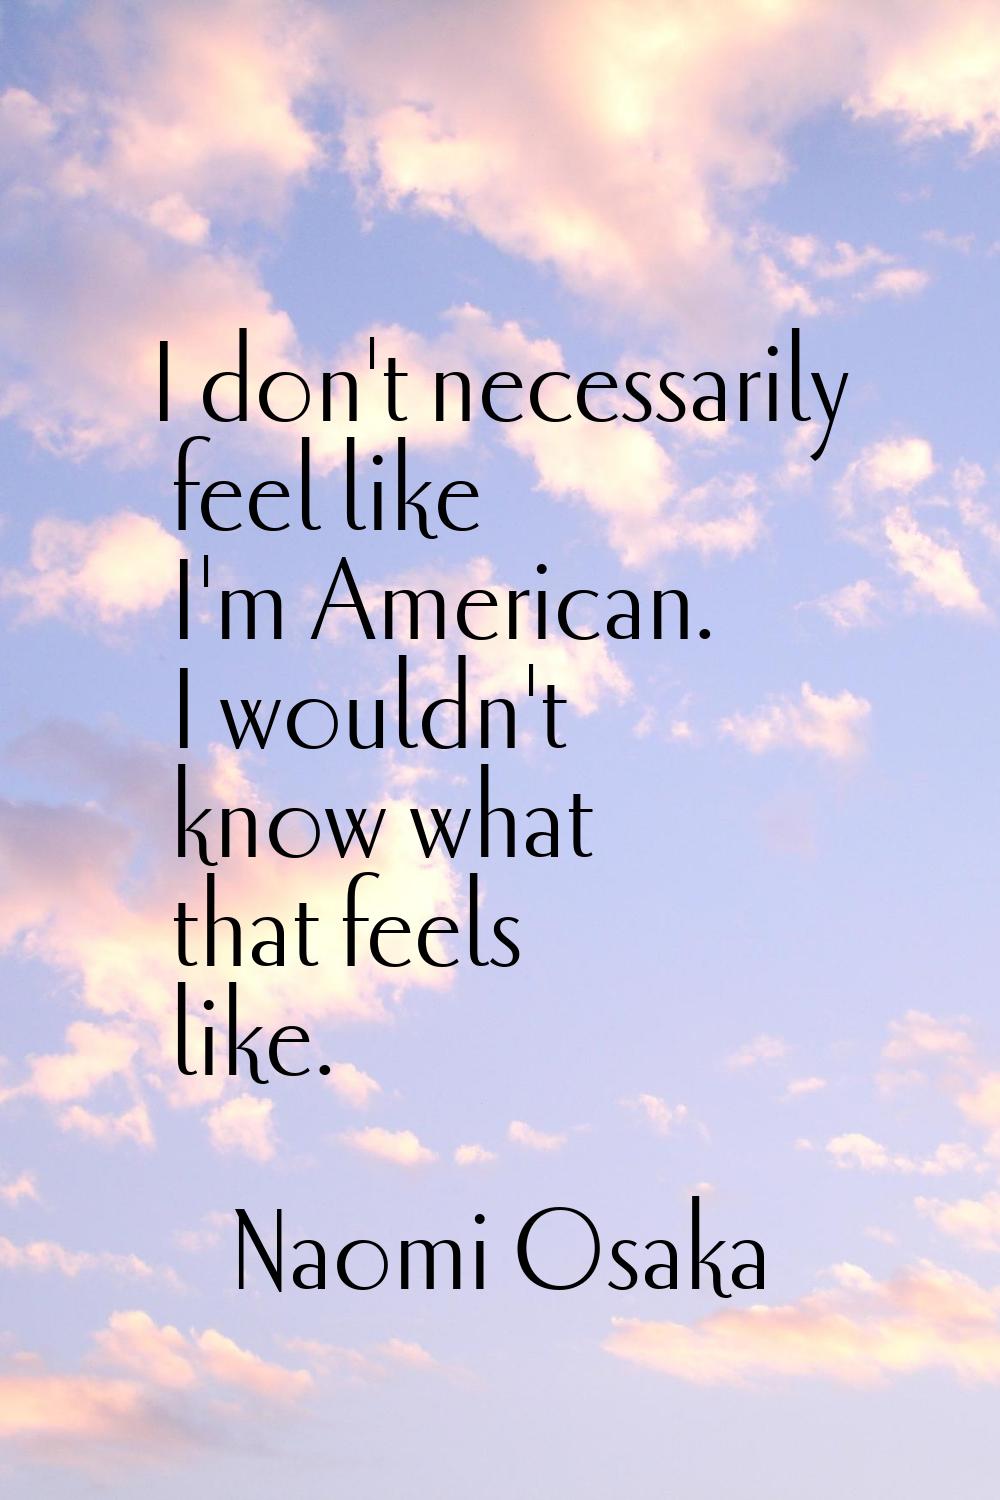 I don't necessarily feel like I'm American. I wouldn't know what that feels like.